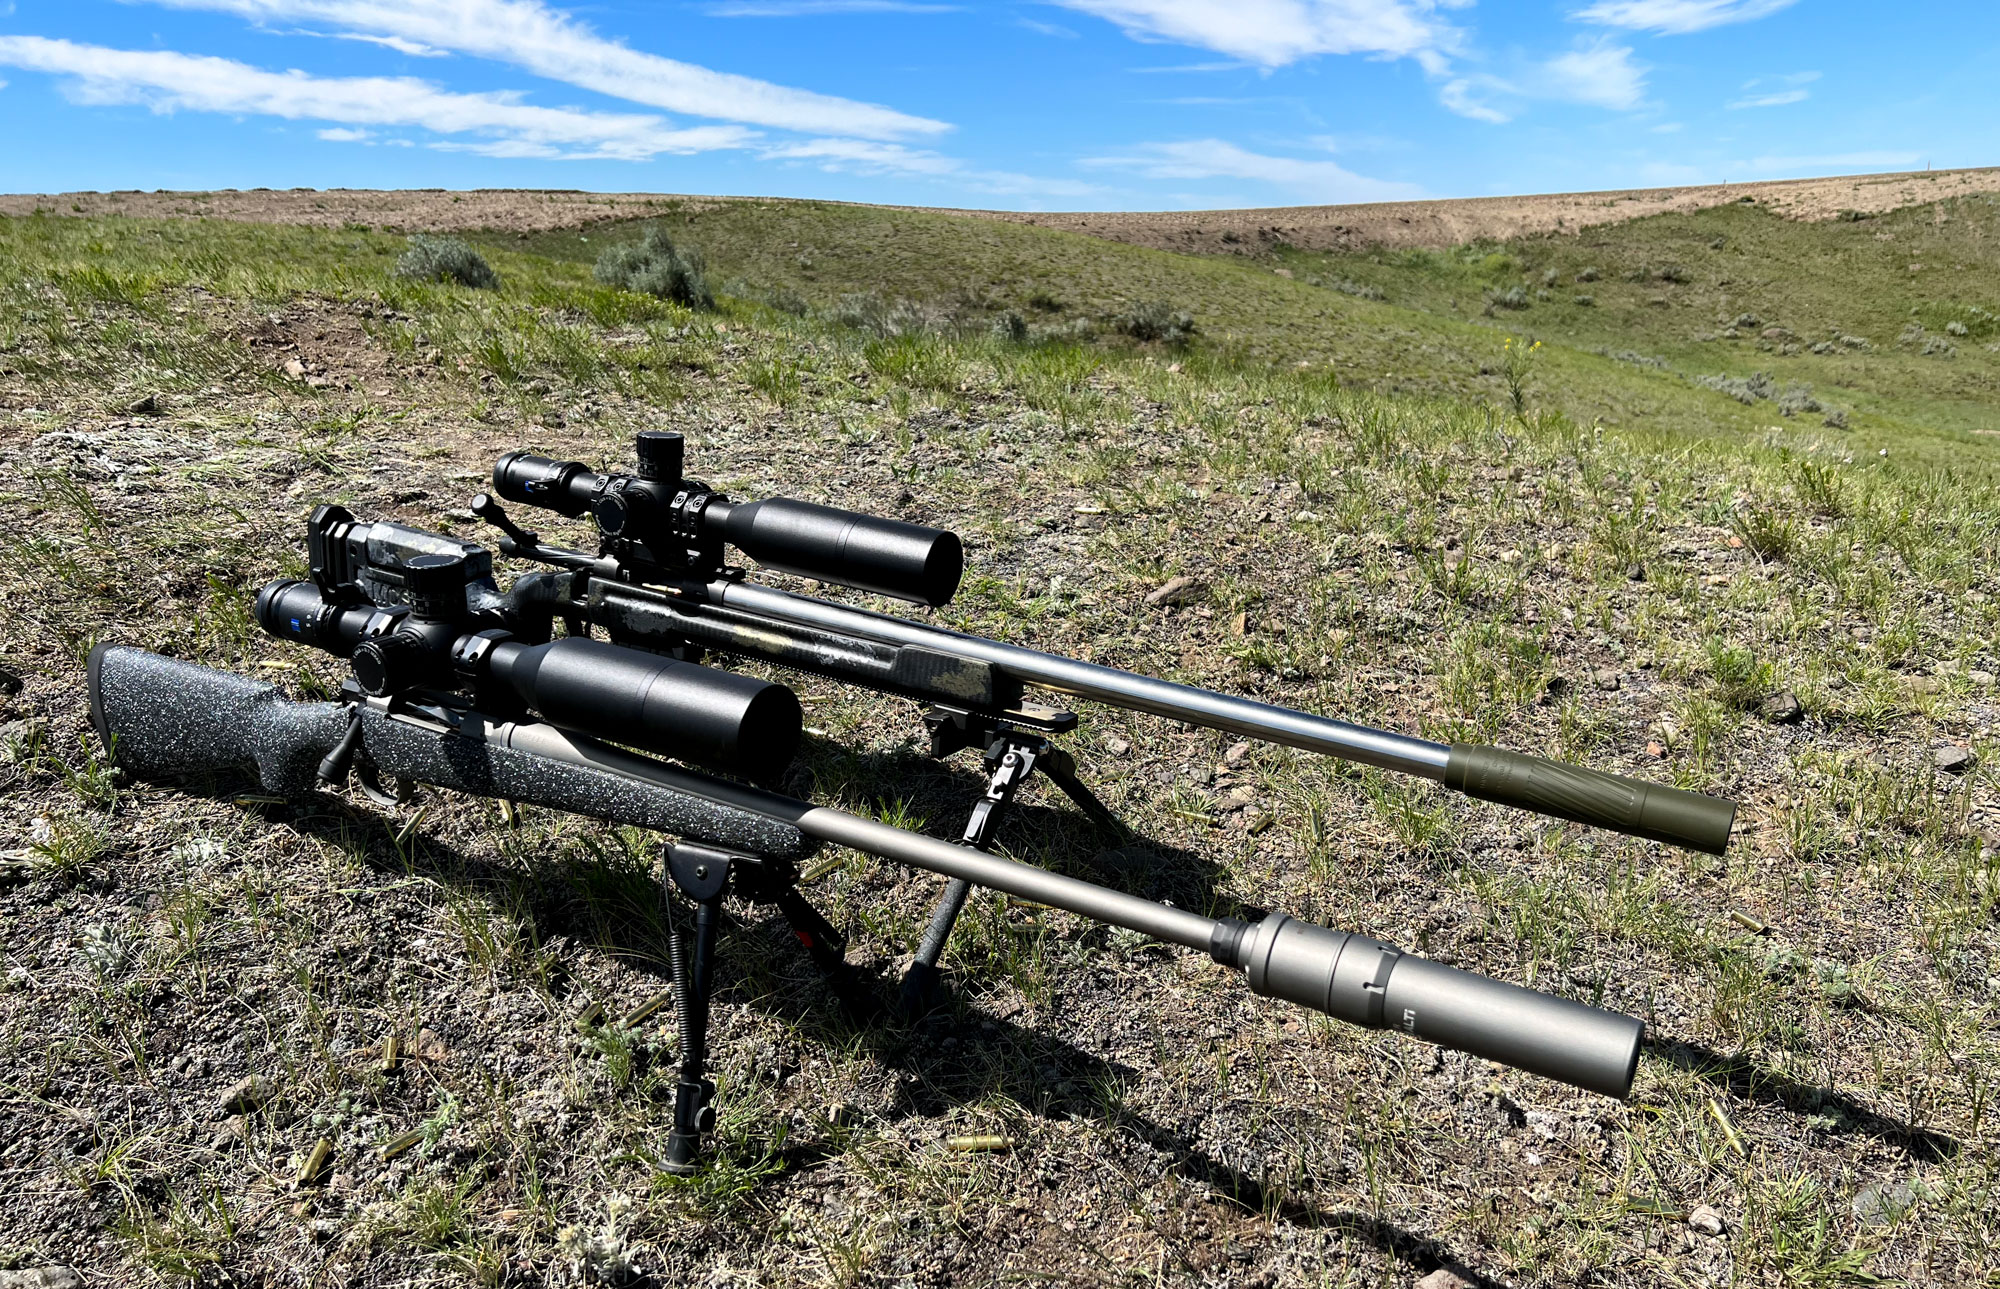 Two Zeiss LRP S5 5-25x56 scopes on rifles in Montana